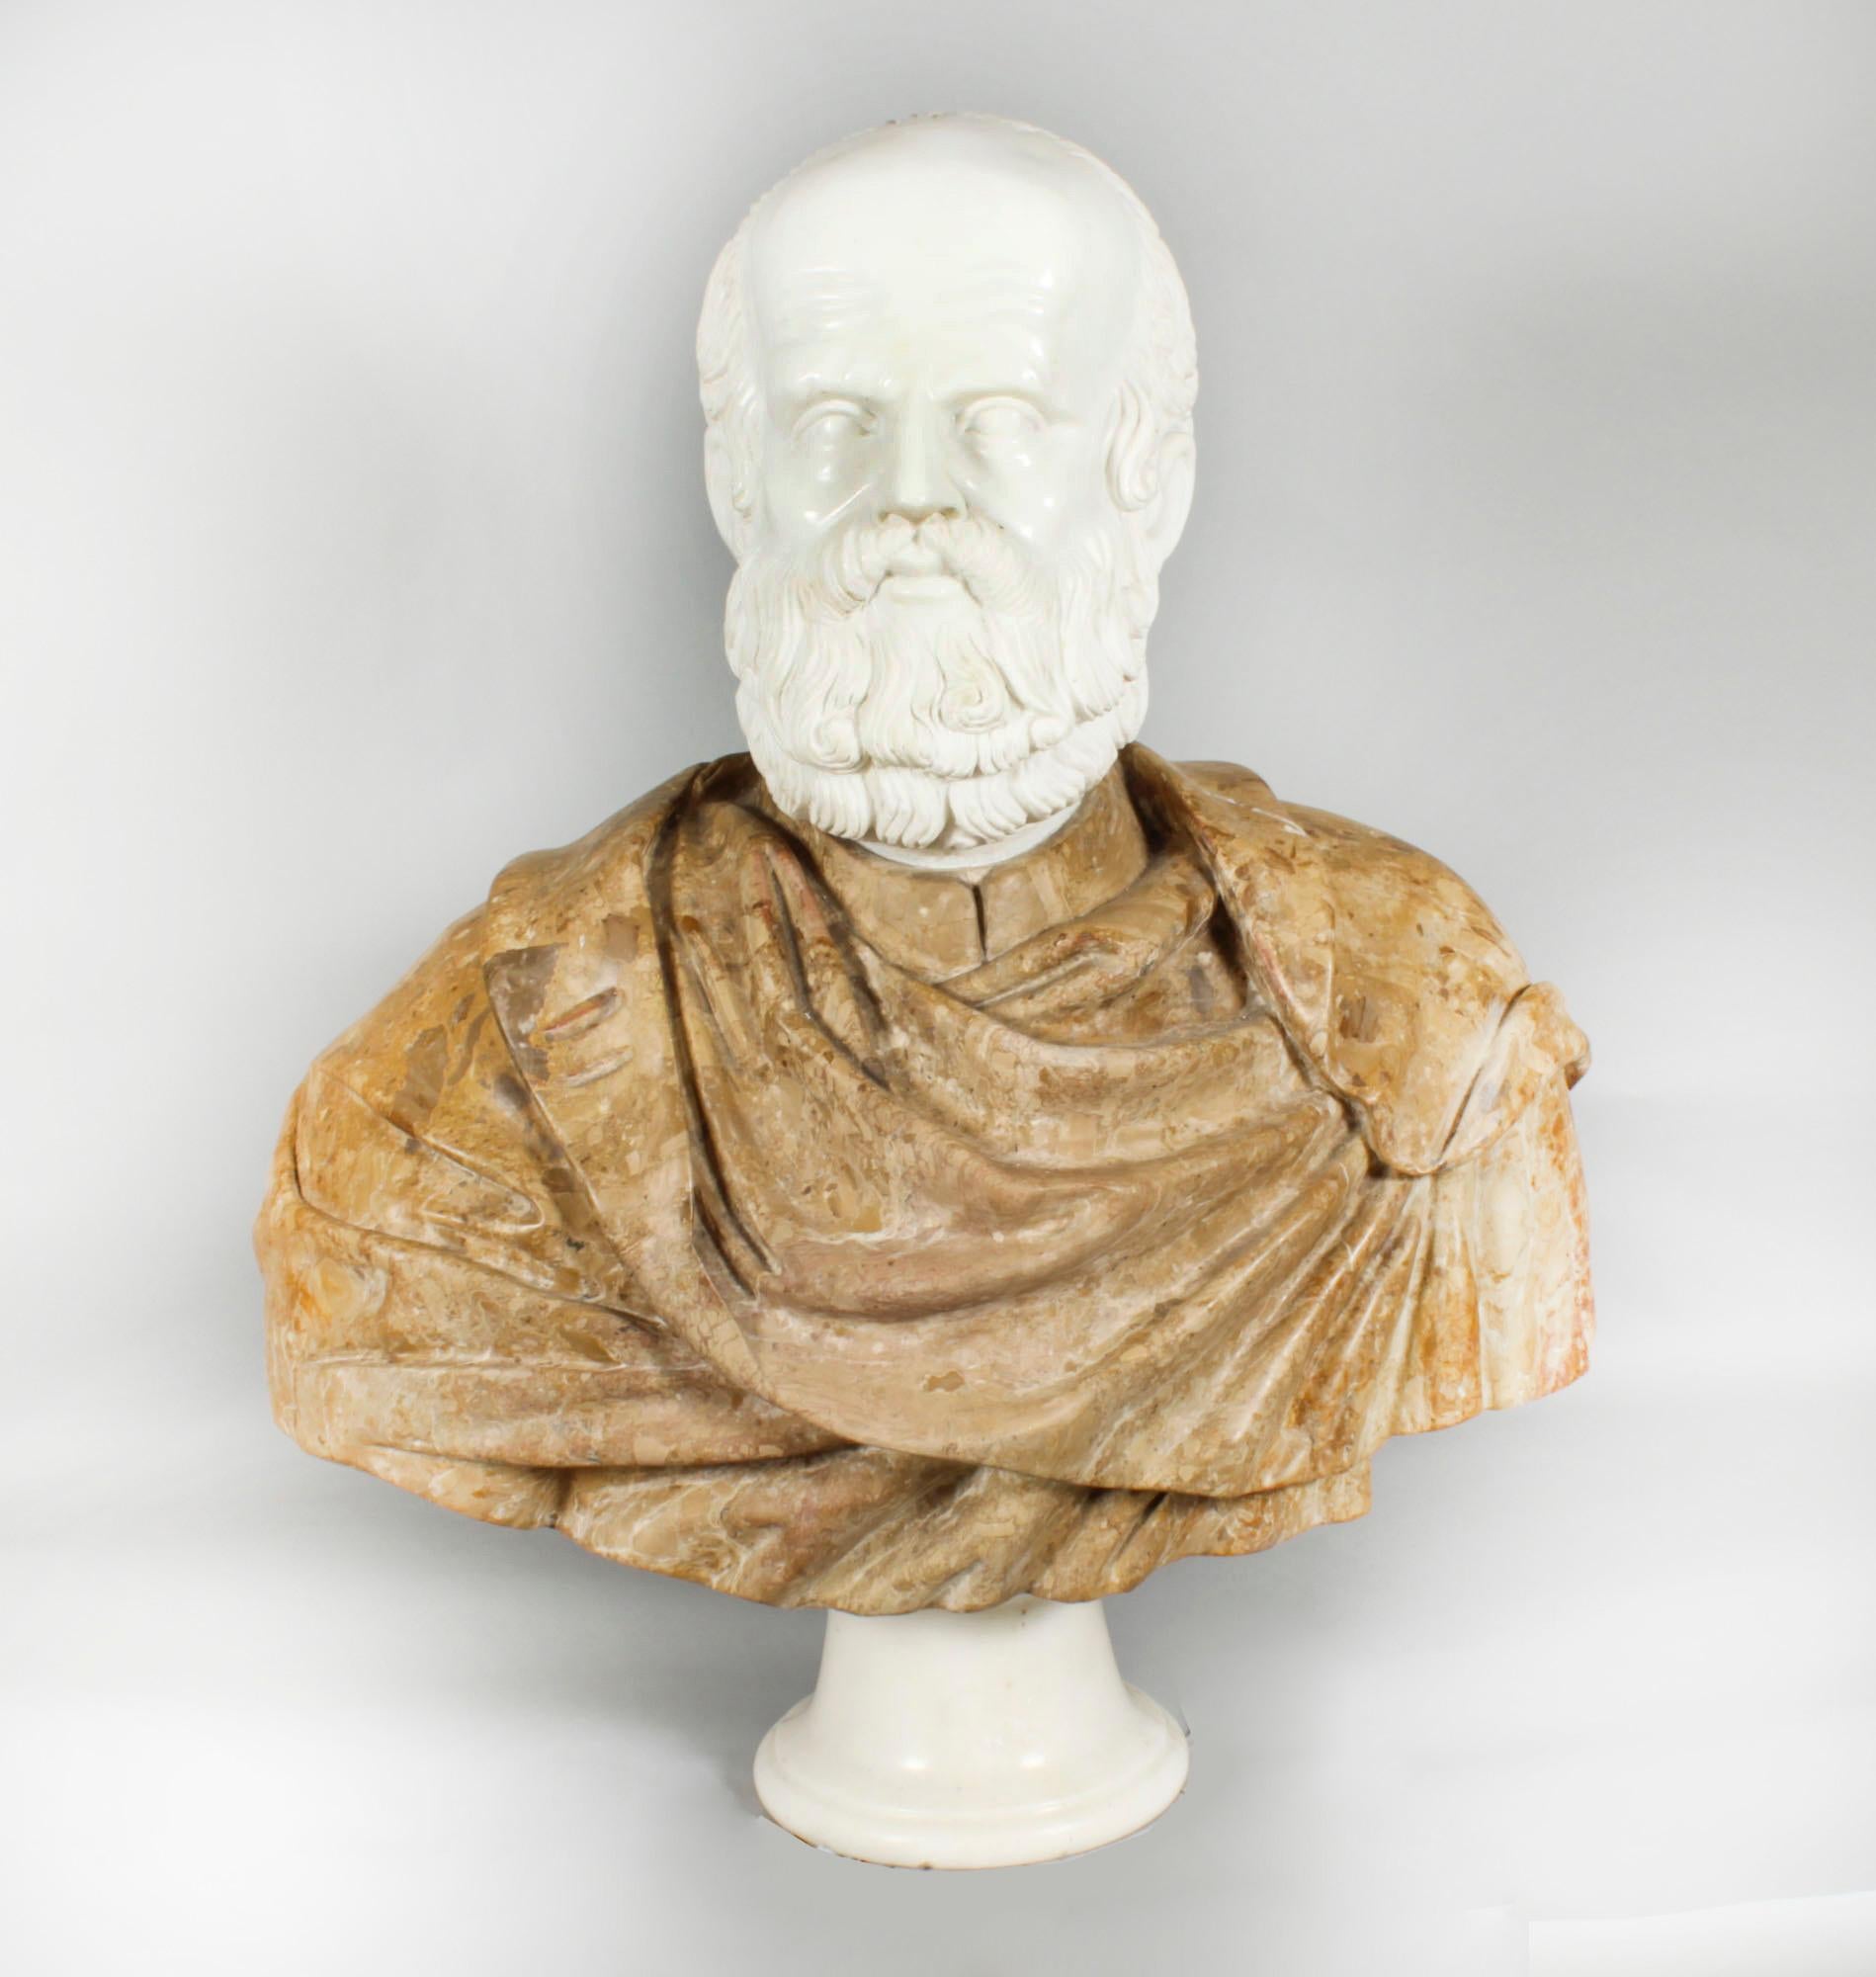 This is monumental vintage Italian marble shoulder length carved bust of Socrates, dating from circa 1950 in date.
 
His face and body has been sensitively modelled in Scagliola and Carrara marble on a cylindrical Carrara plinth base, the bust is